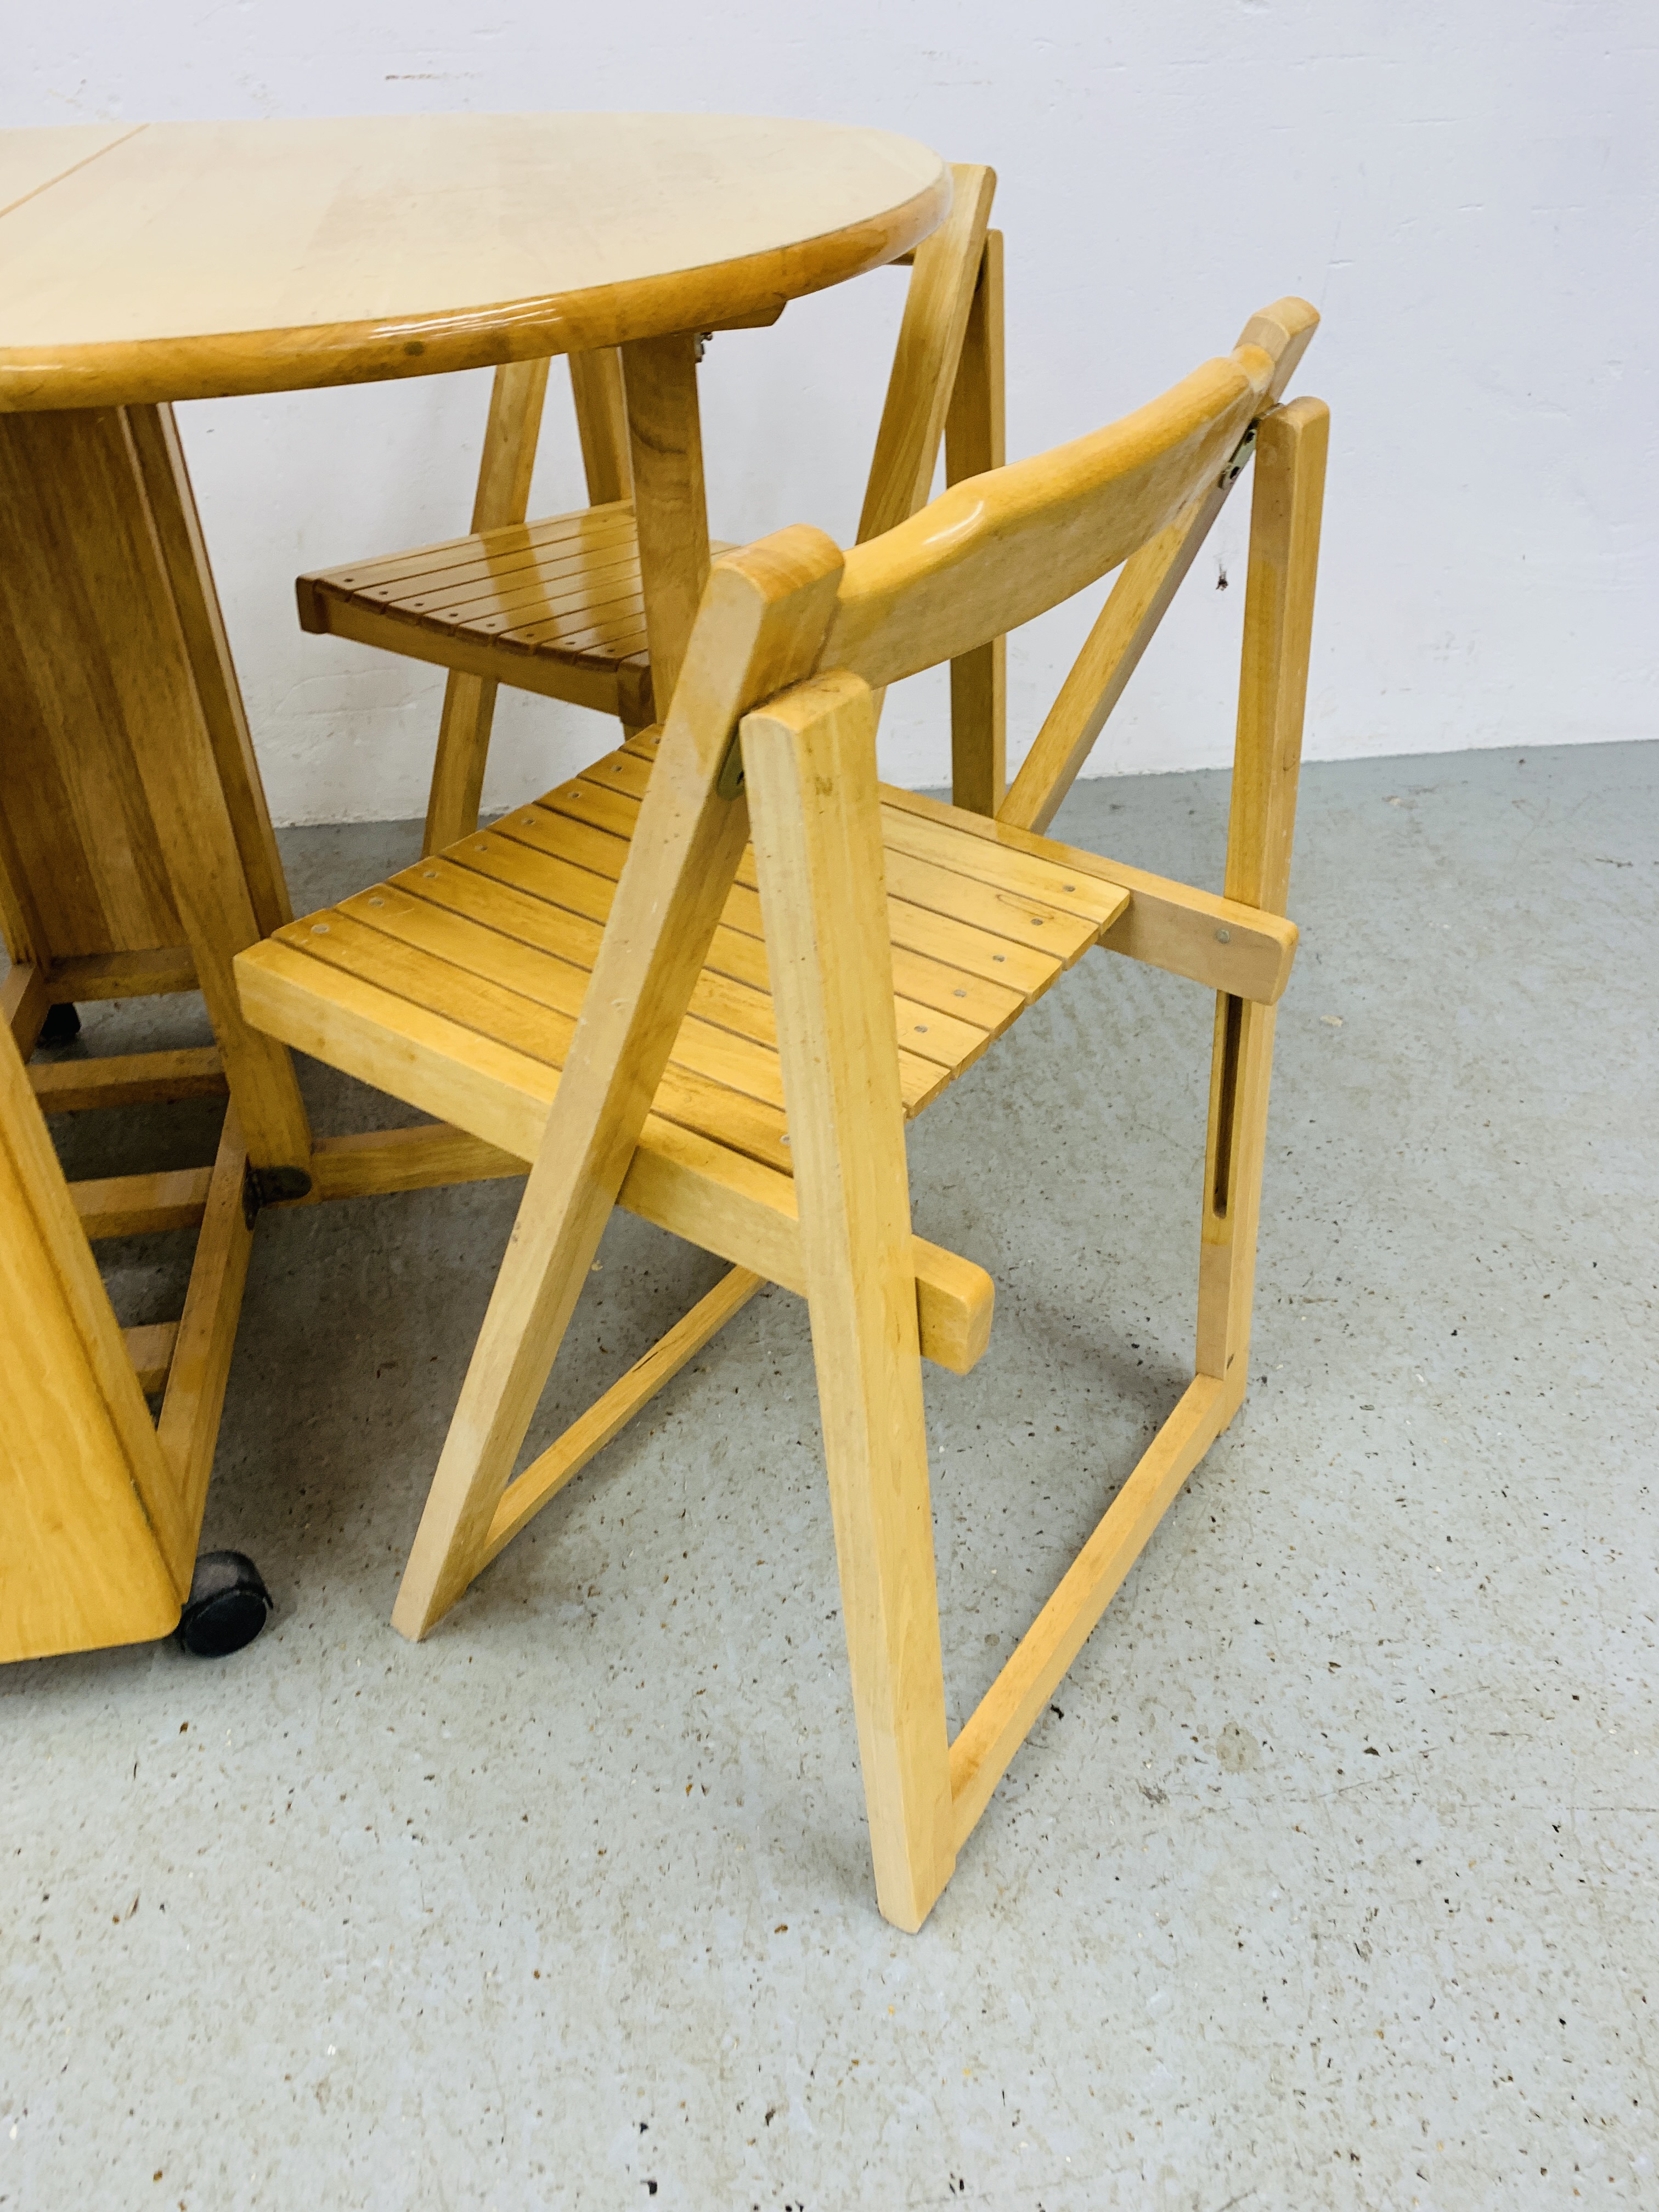 MODERN BEECH WOOD COMPACT GATELEG DINING SET (TABLE AND FOUR FOLDING CHAIRS) - W 85CM. L 132CM. - Image 8 of 8